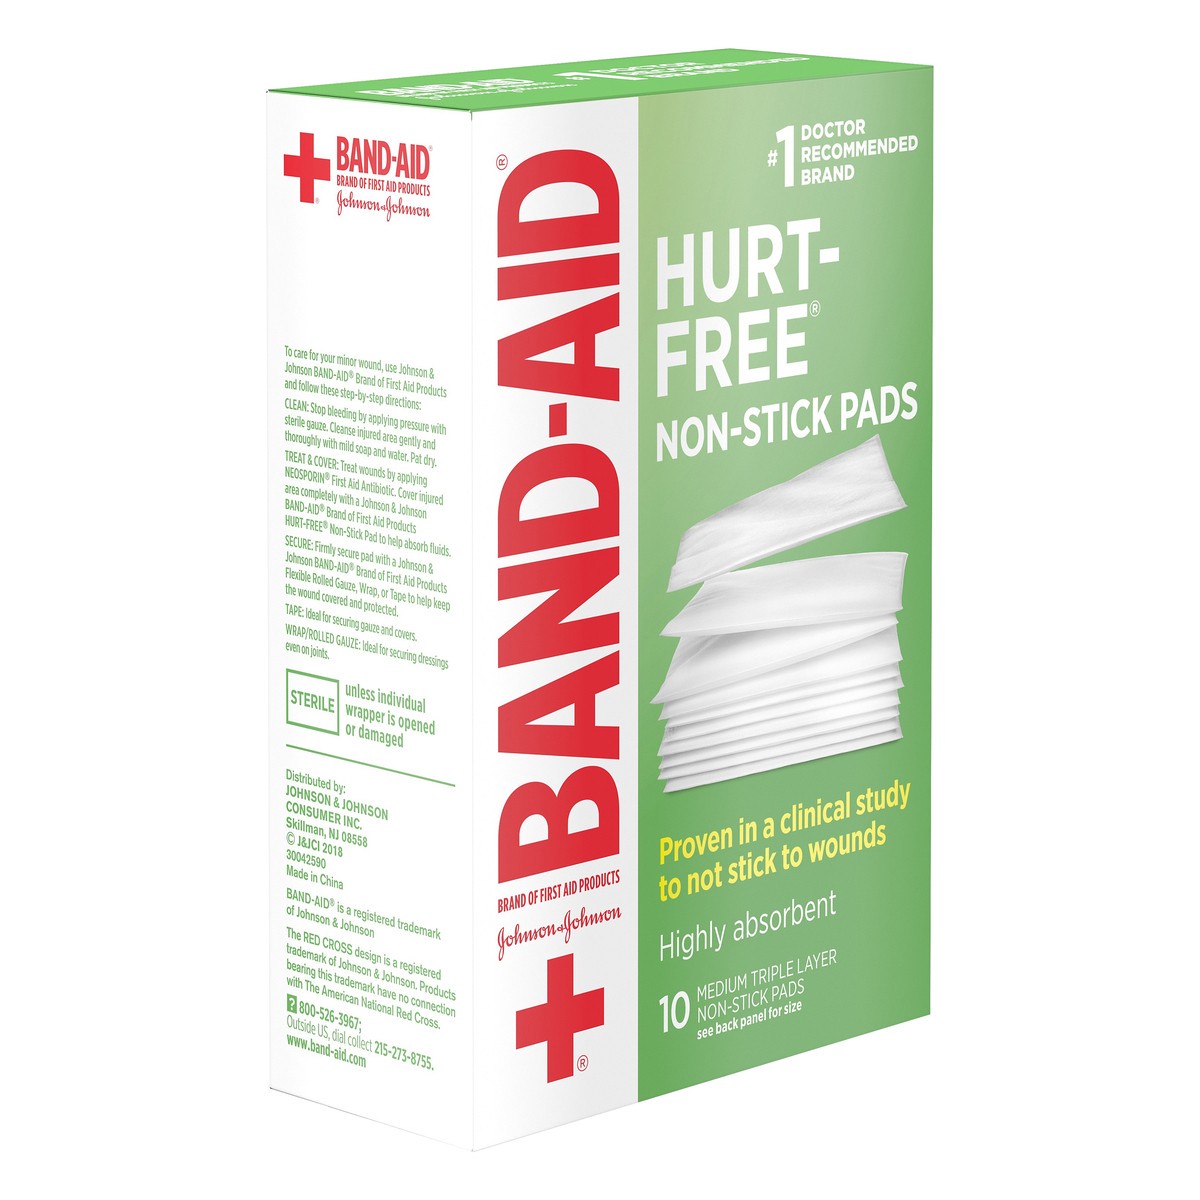 slide 3 of 7, BAND-AID Hurt-Free Non-Stick Pads with Hurt-Free Design for Wound Care & Wound Protection, Highly-Absorbent Individually-Wrapped Sterile Pads, Medium Size, 2 inches x 3 inches, 10 ct, 10 ct